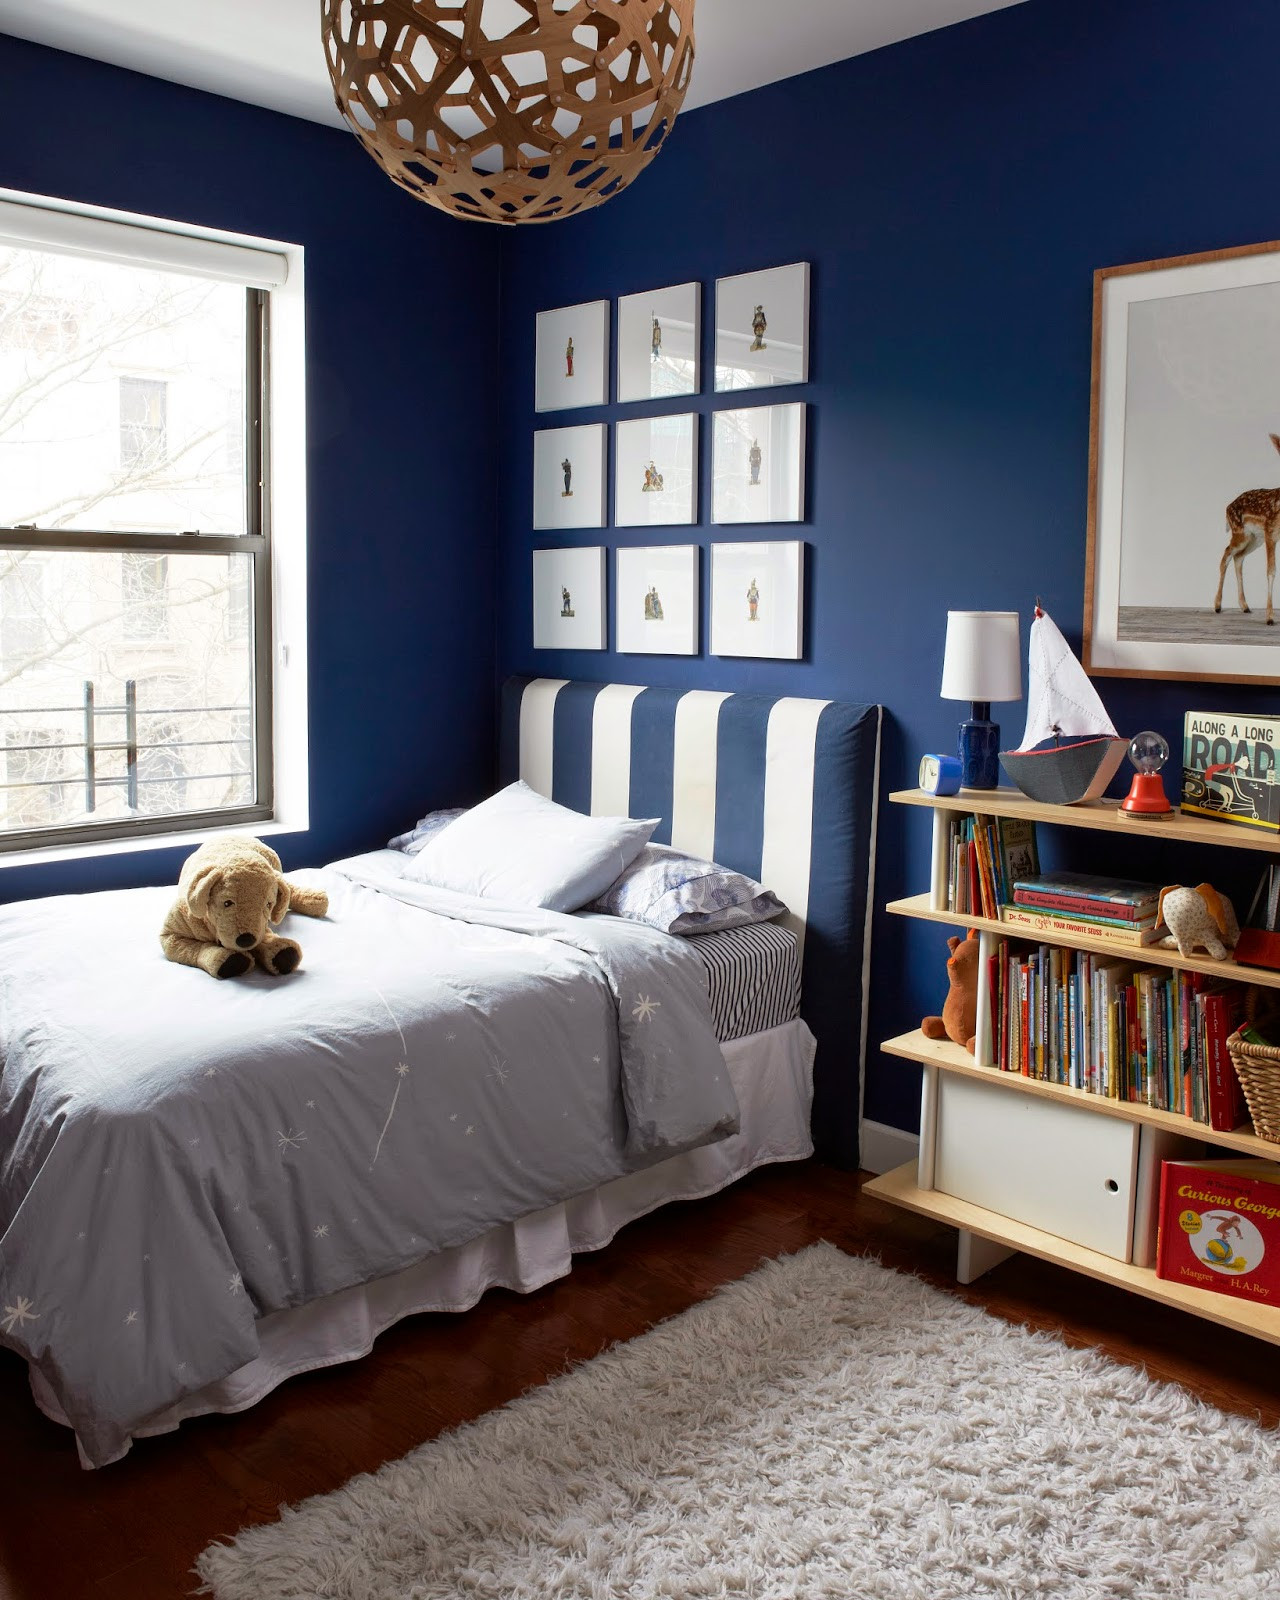 Blue Paint Colors For Bedroom
 Help Which Bedroom Paint Color Would You Choose